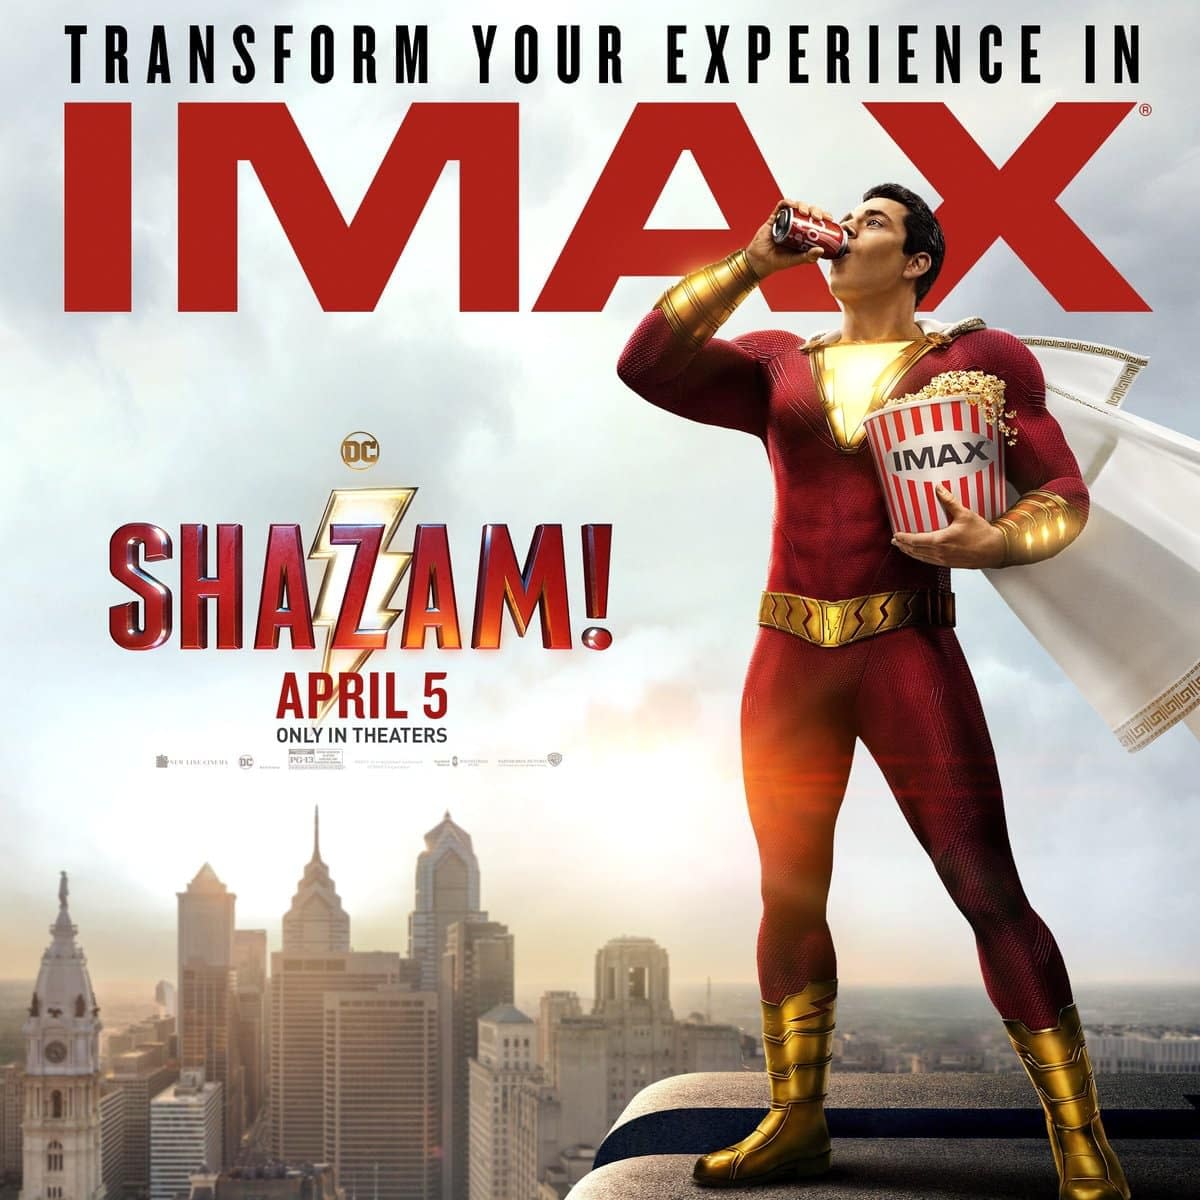 IMAX Shares New Exclusive Artwork for Shazam!